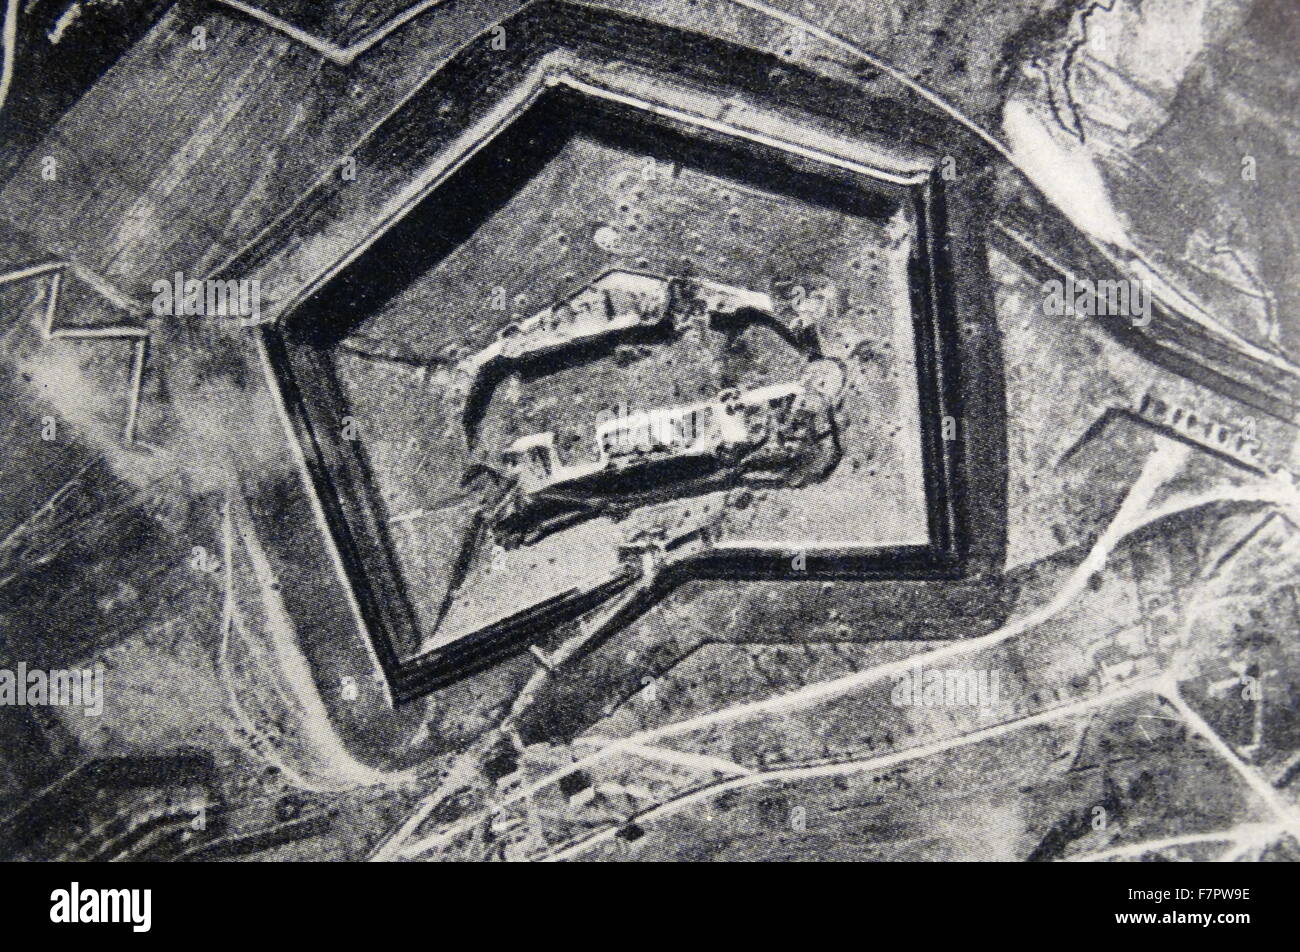 Fort Douaumont, protecting the city of Verdun, before the Battle of Verdun 1916 Stock Photo